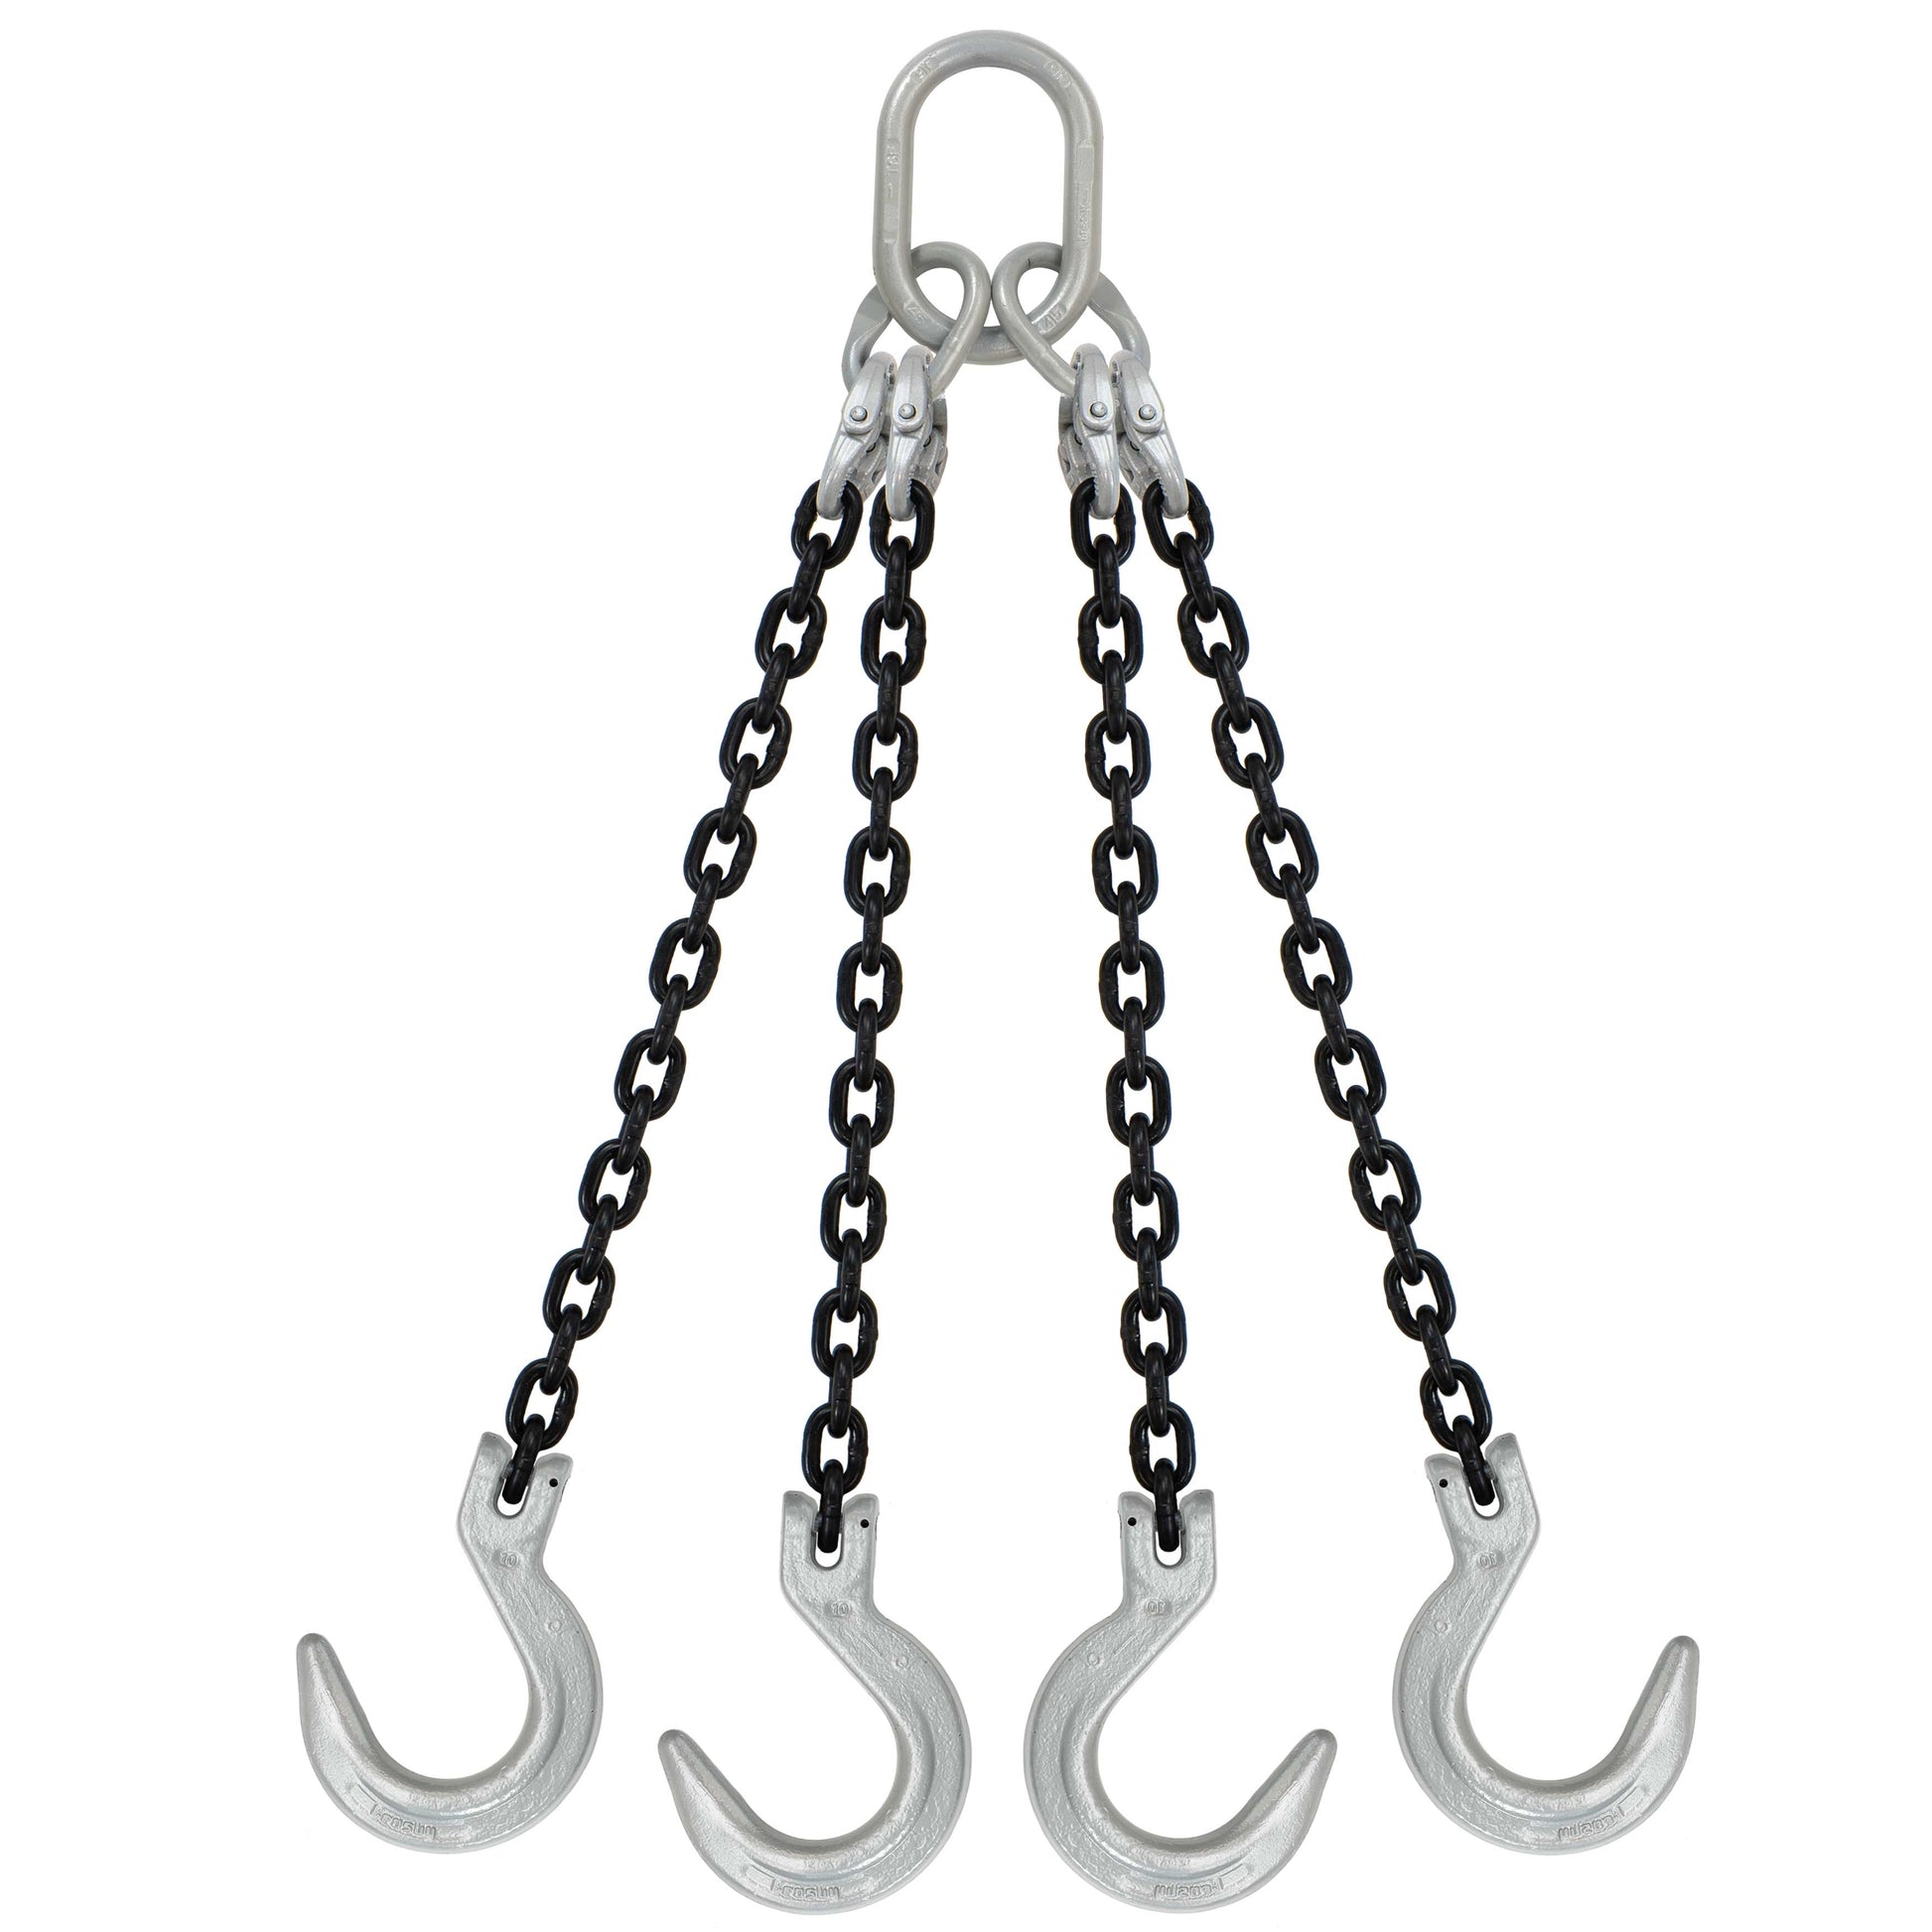 932 inch x 14 foot Domestic 4 Leg Chain Sling w Crosby Foundry Hooks Grade 100 image 1 of 2